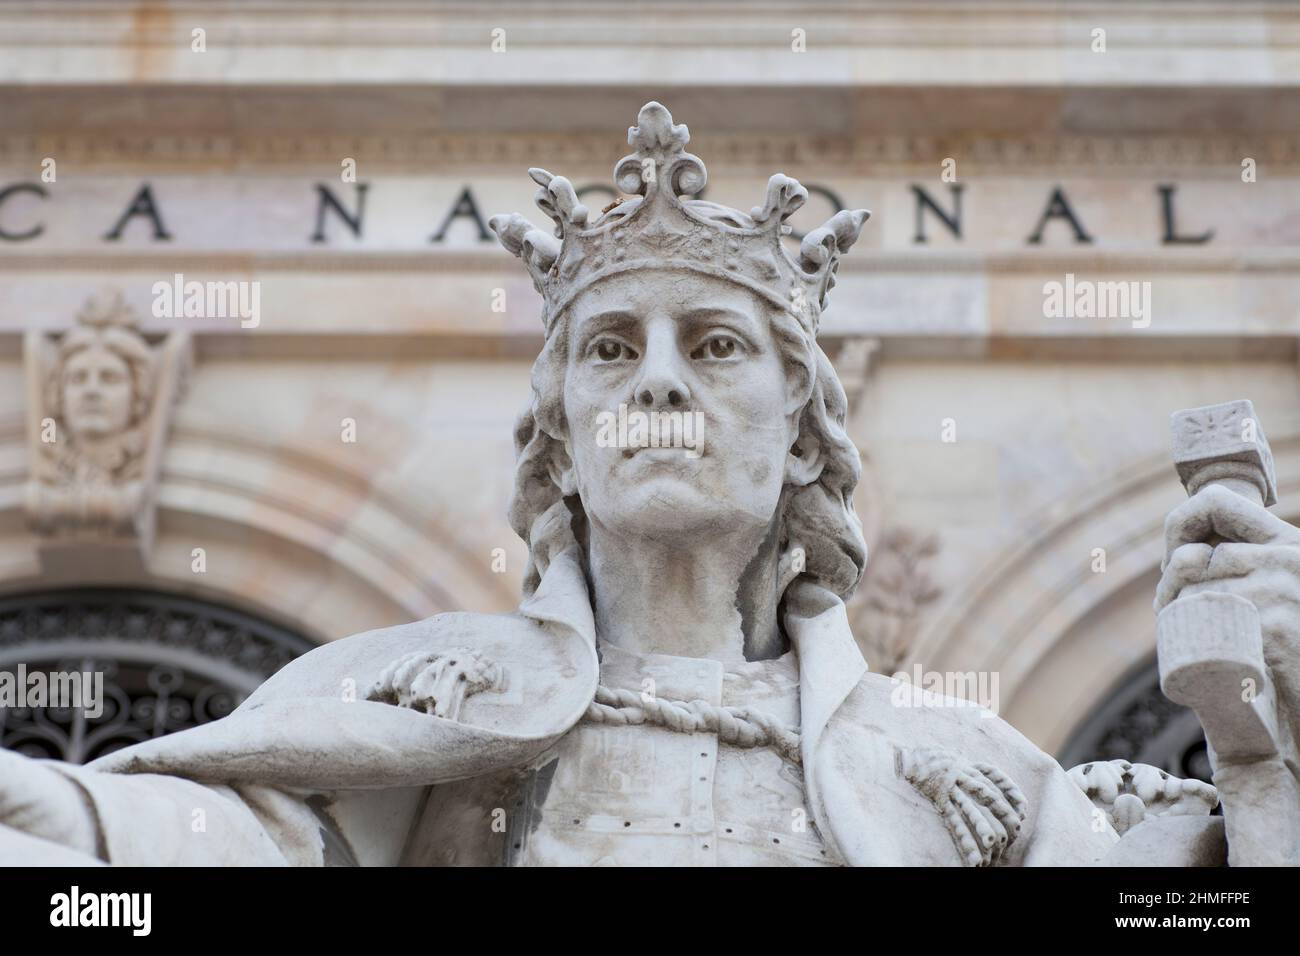 Alfonso X of Castile sculpture at National Library of Spain, Madrid. Sculpted by Jose Alcoverro Amoros Stock Photo